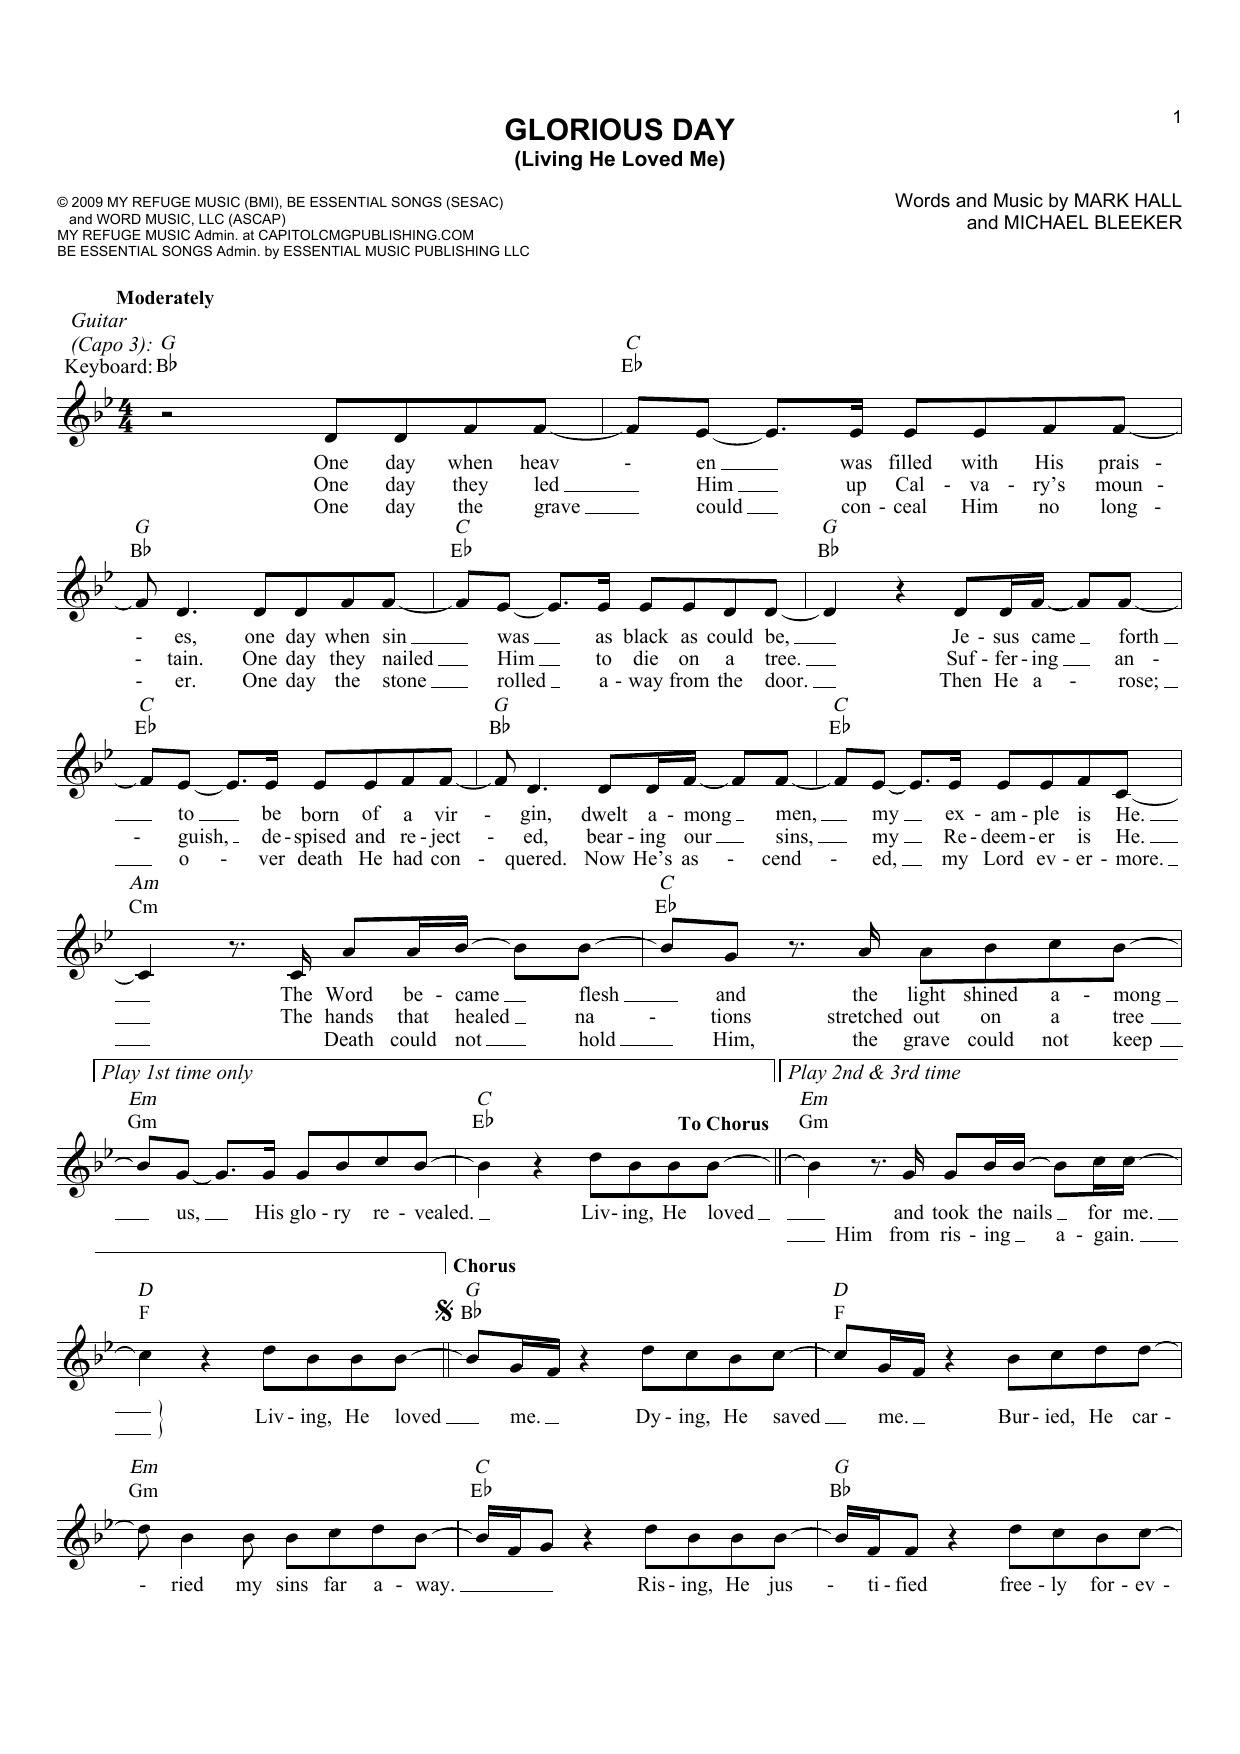 Download Casting Crowns Glorious Day (Living He Loved Me) Sheet Music